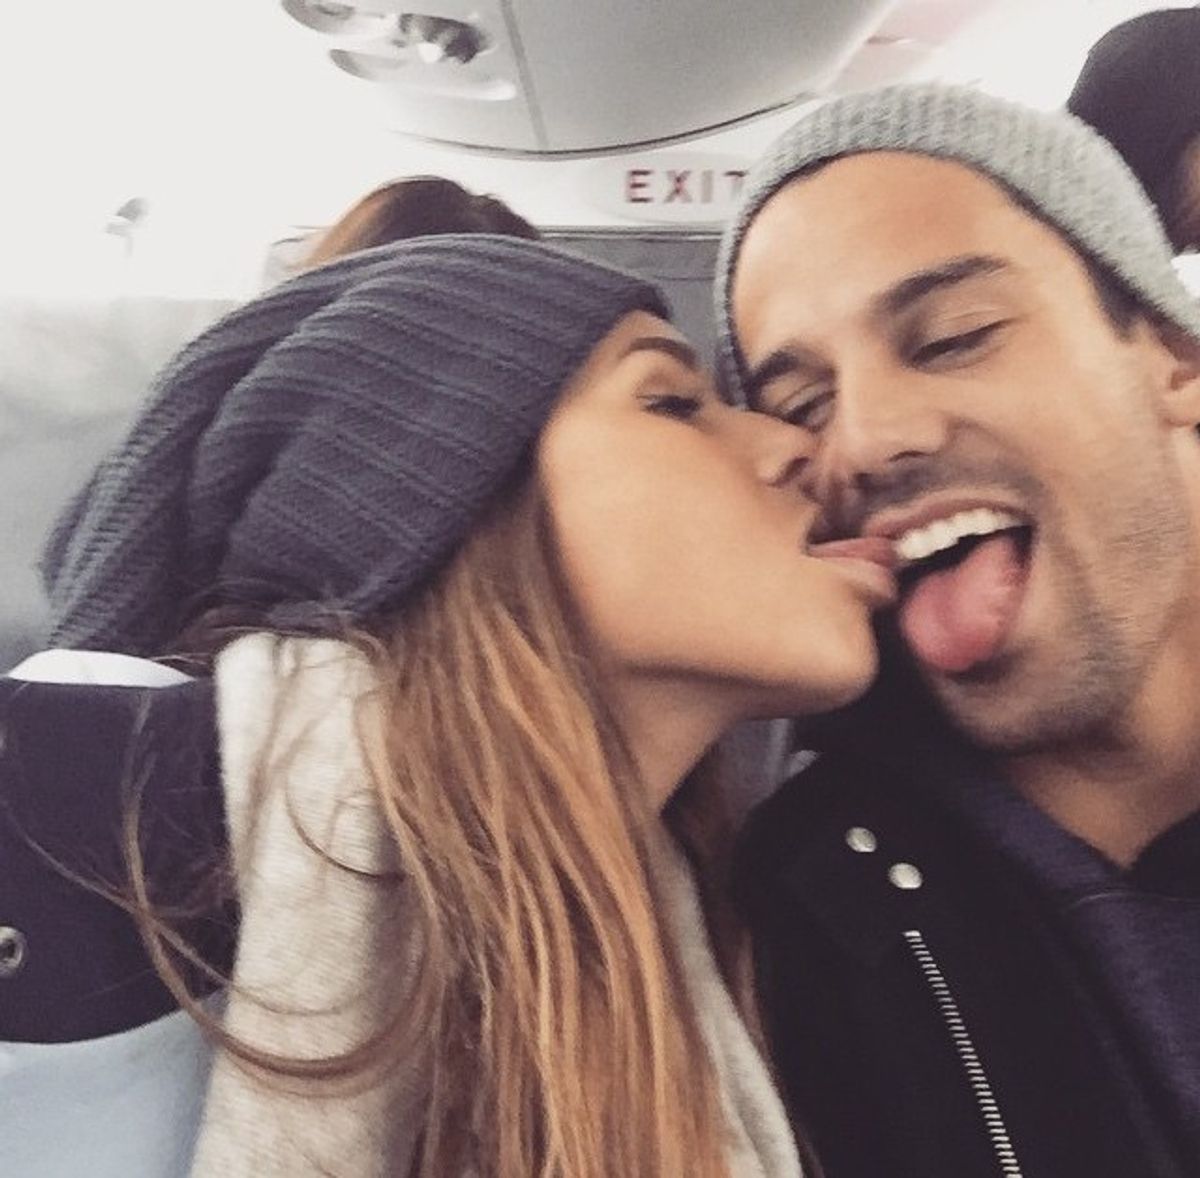 Eric Decker And Jessie James Decker Are Seriously #RelationshipGoals